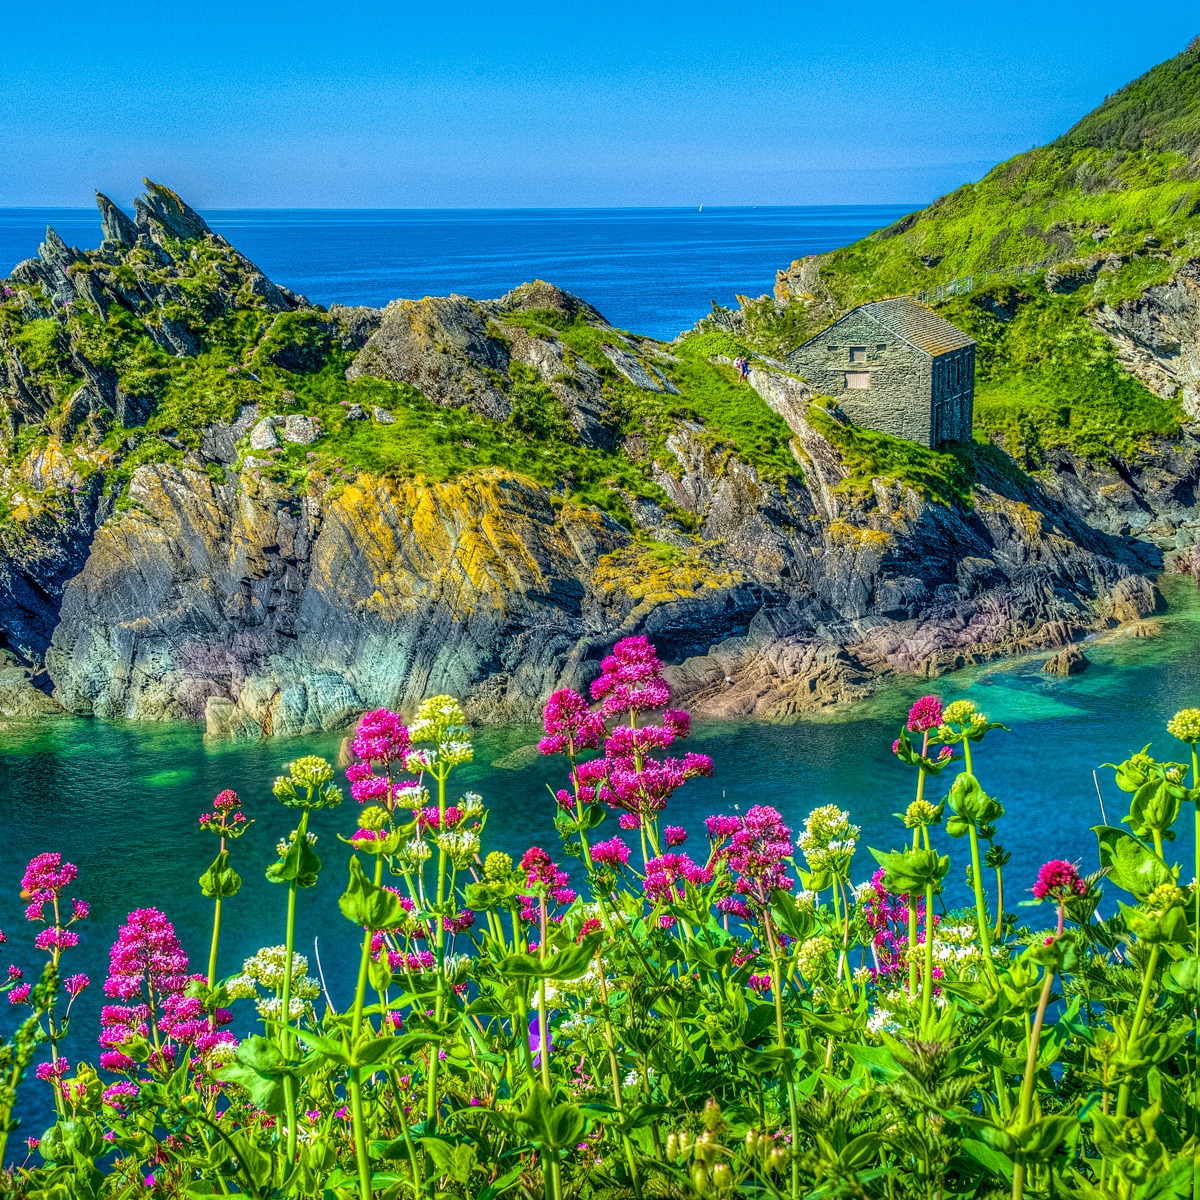 Old stone house at the entrance of the port of Polperro, Cornwall, England, United Kingdom. Cornish Valerian is in the foreground.